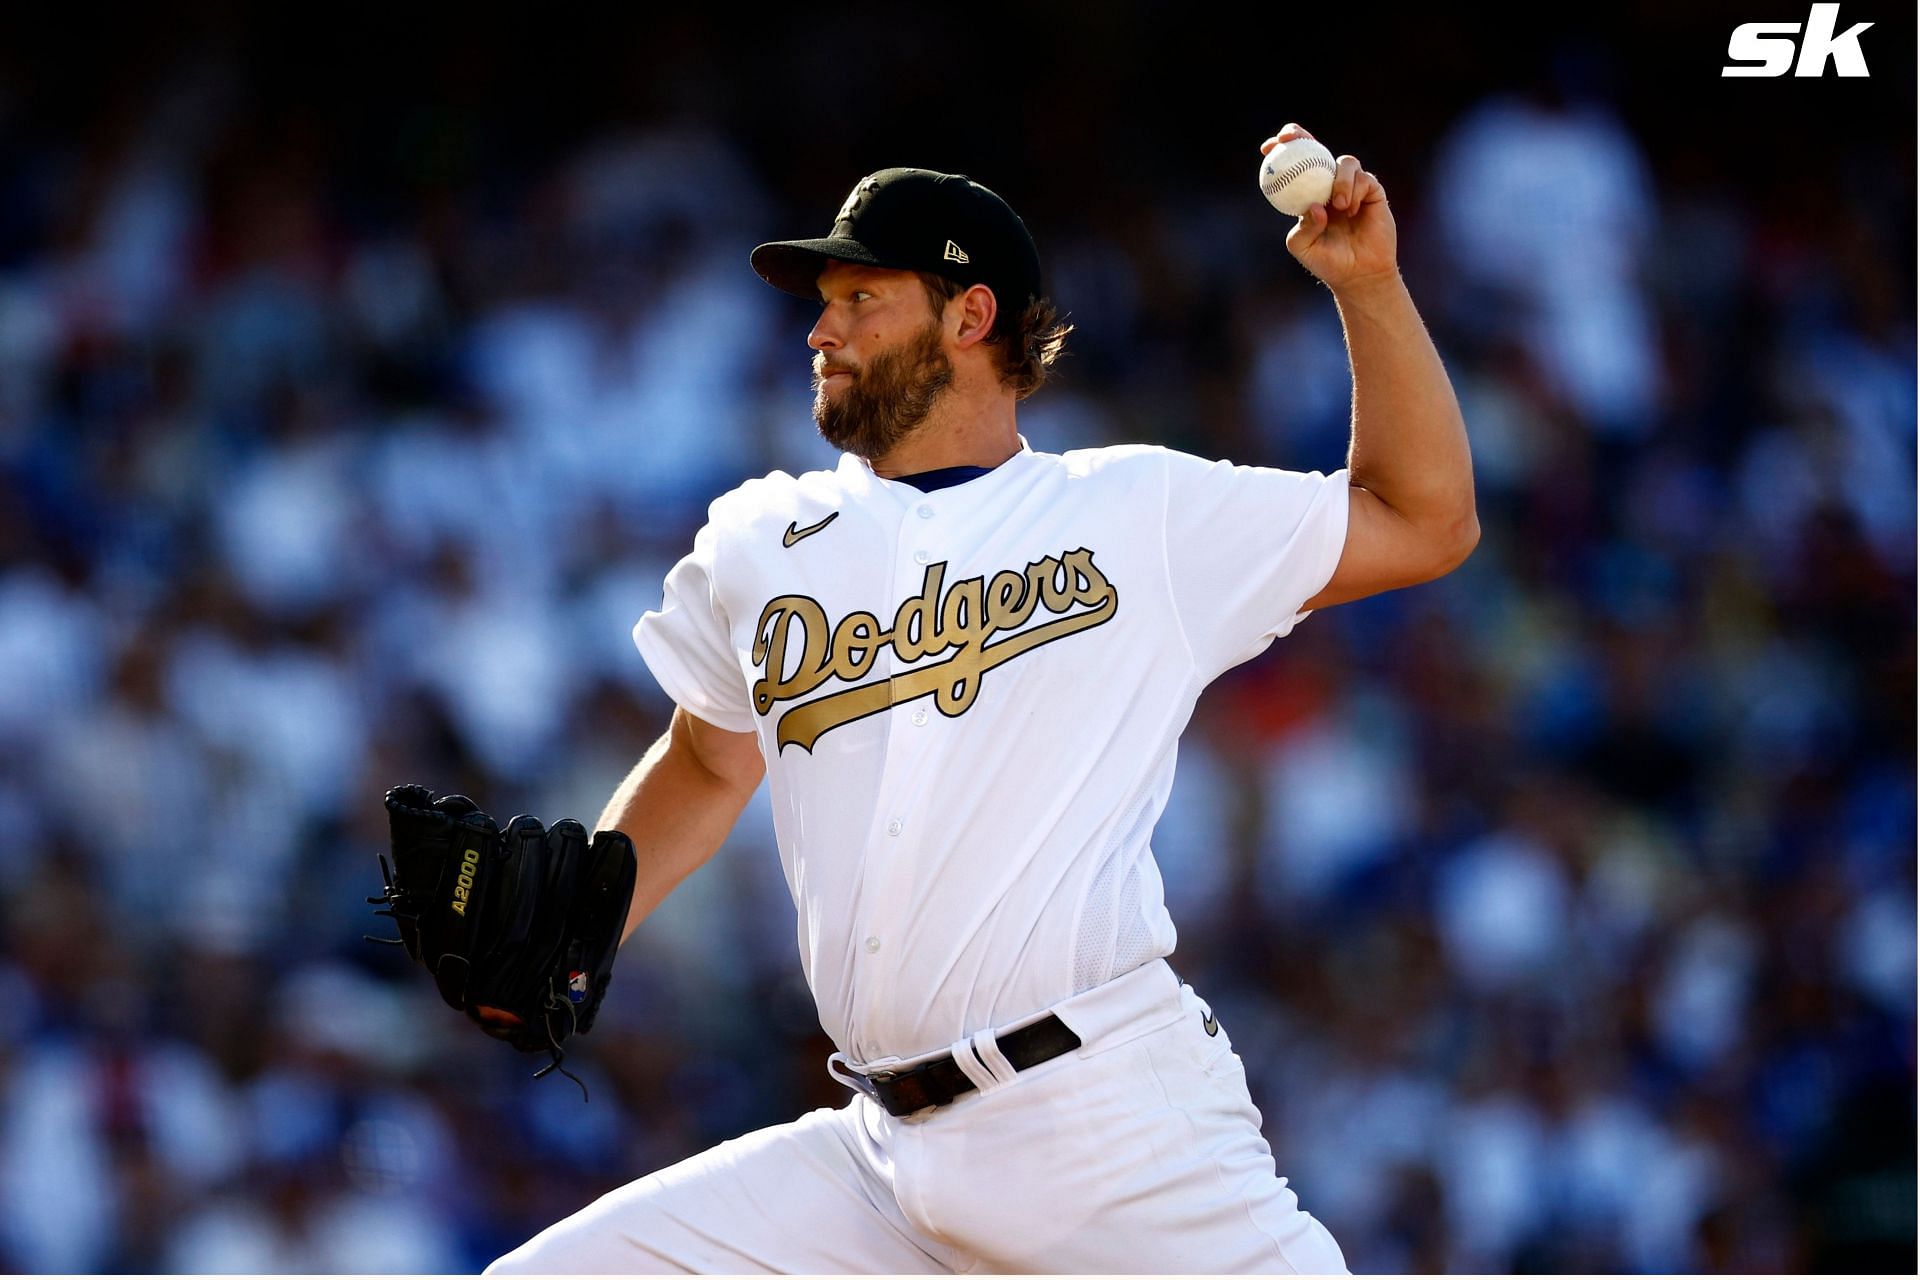 Clayton Kershaw discussed his views on Christianity